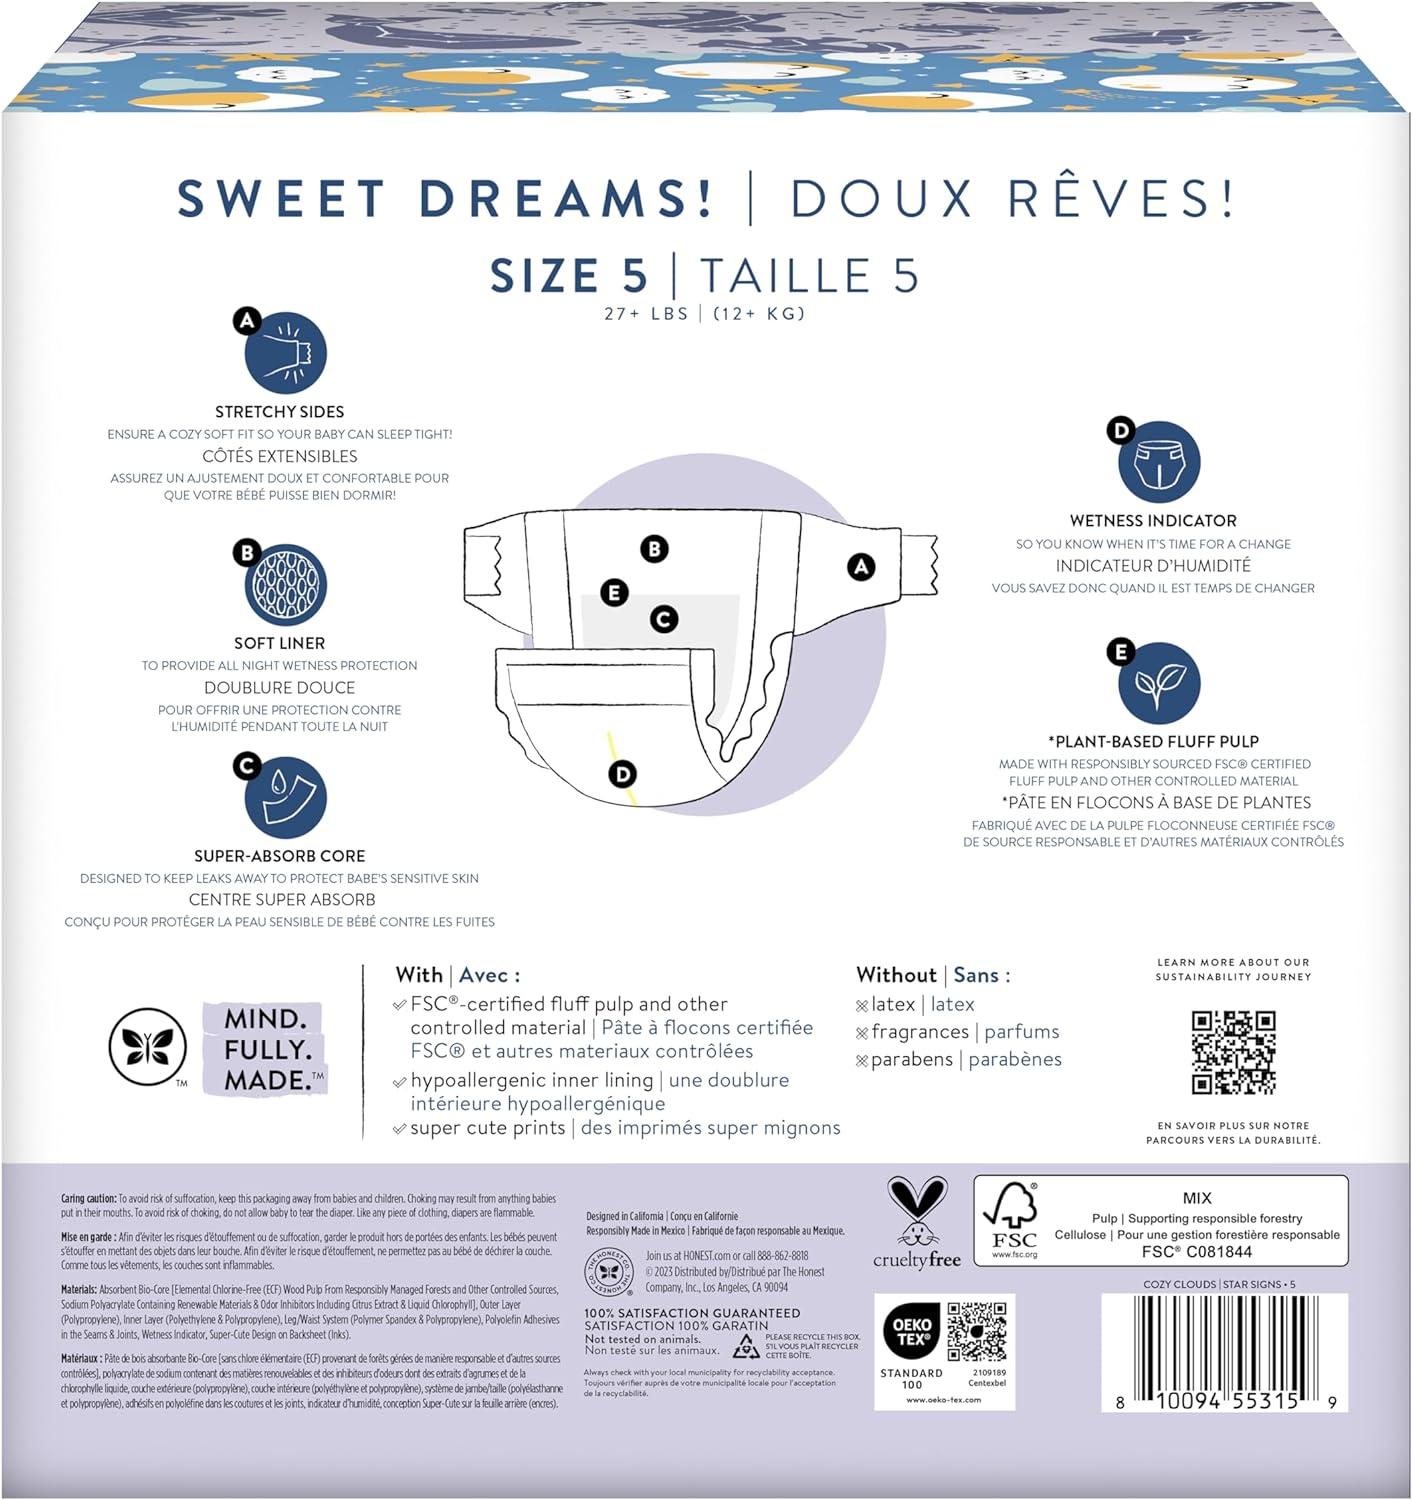 Size 5 Overnight Diapers by Honest Co